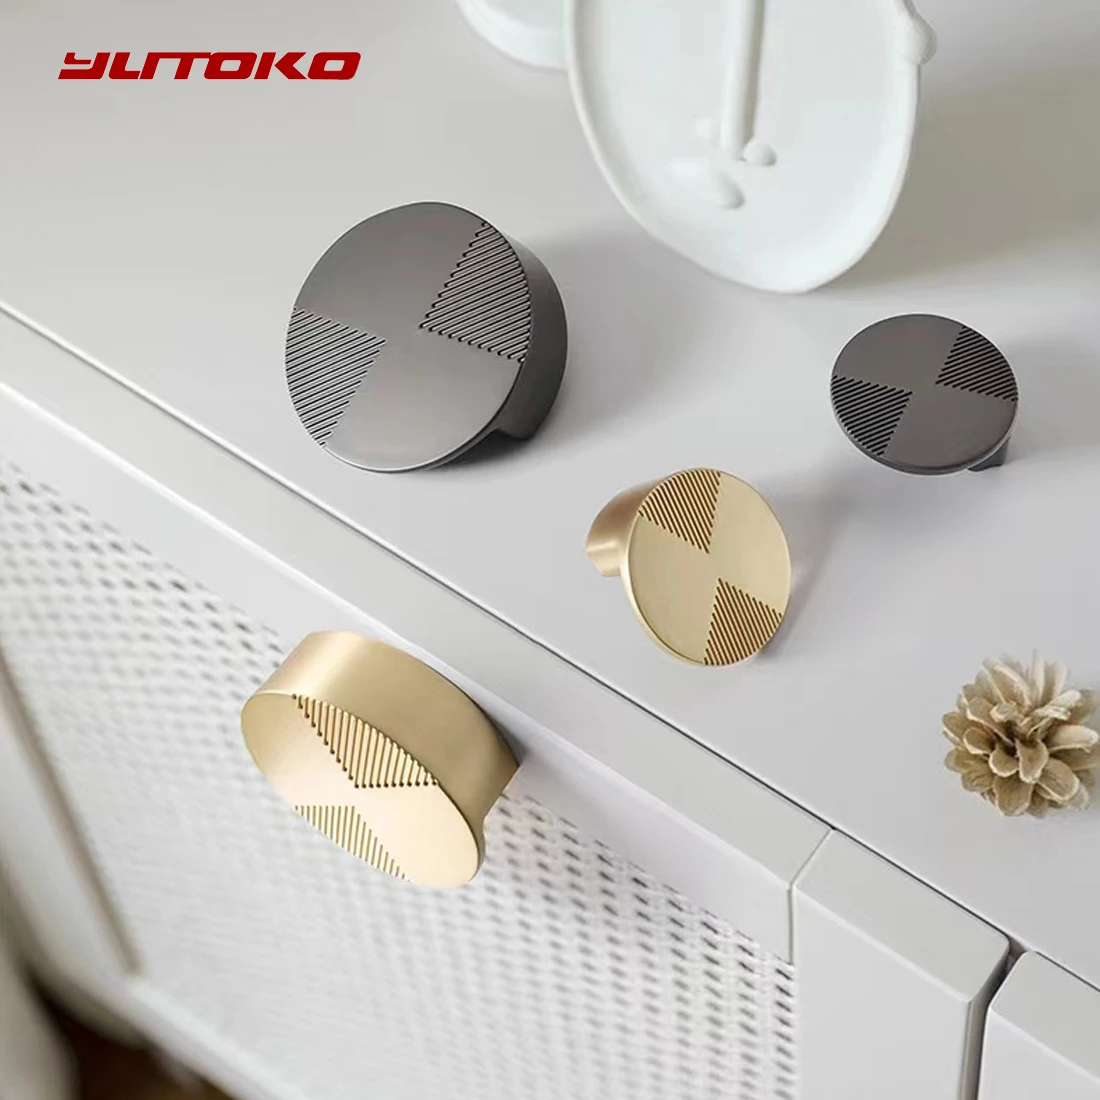 YUTOKO Solid Zinc Alloy Cabinet Knobs Kitchen Cabinet Handles Round Gold Drawer Pull Furniture Door Handle Nordic Simple Handles